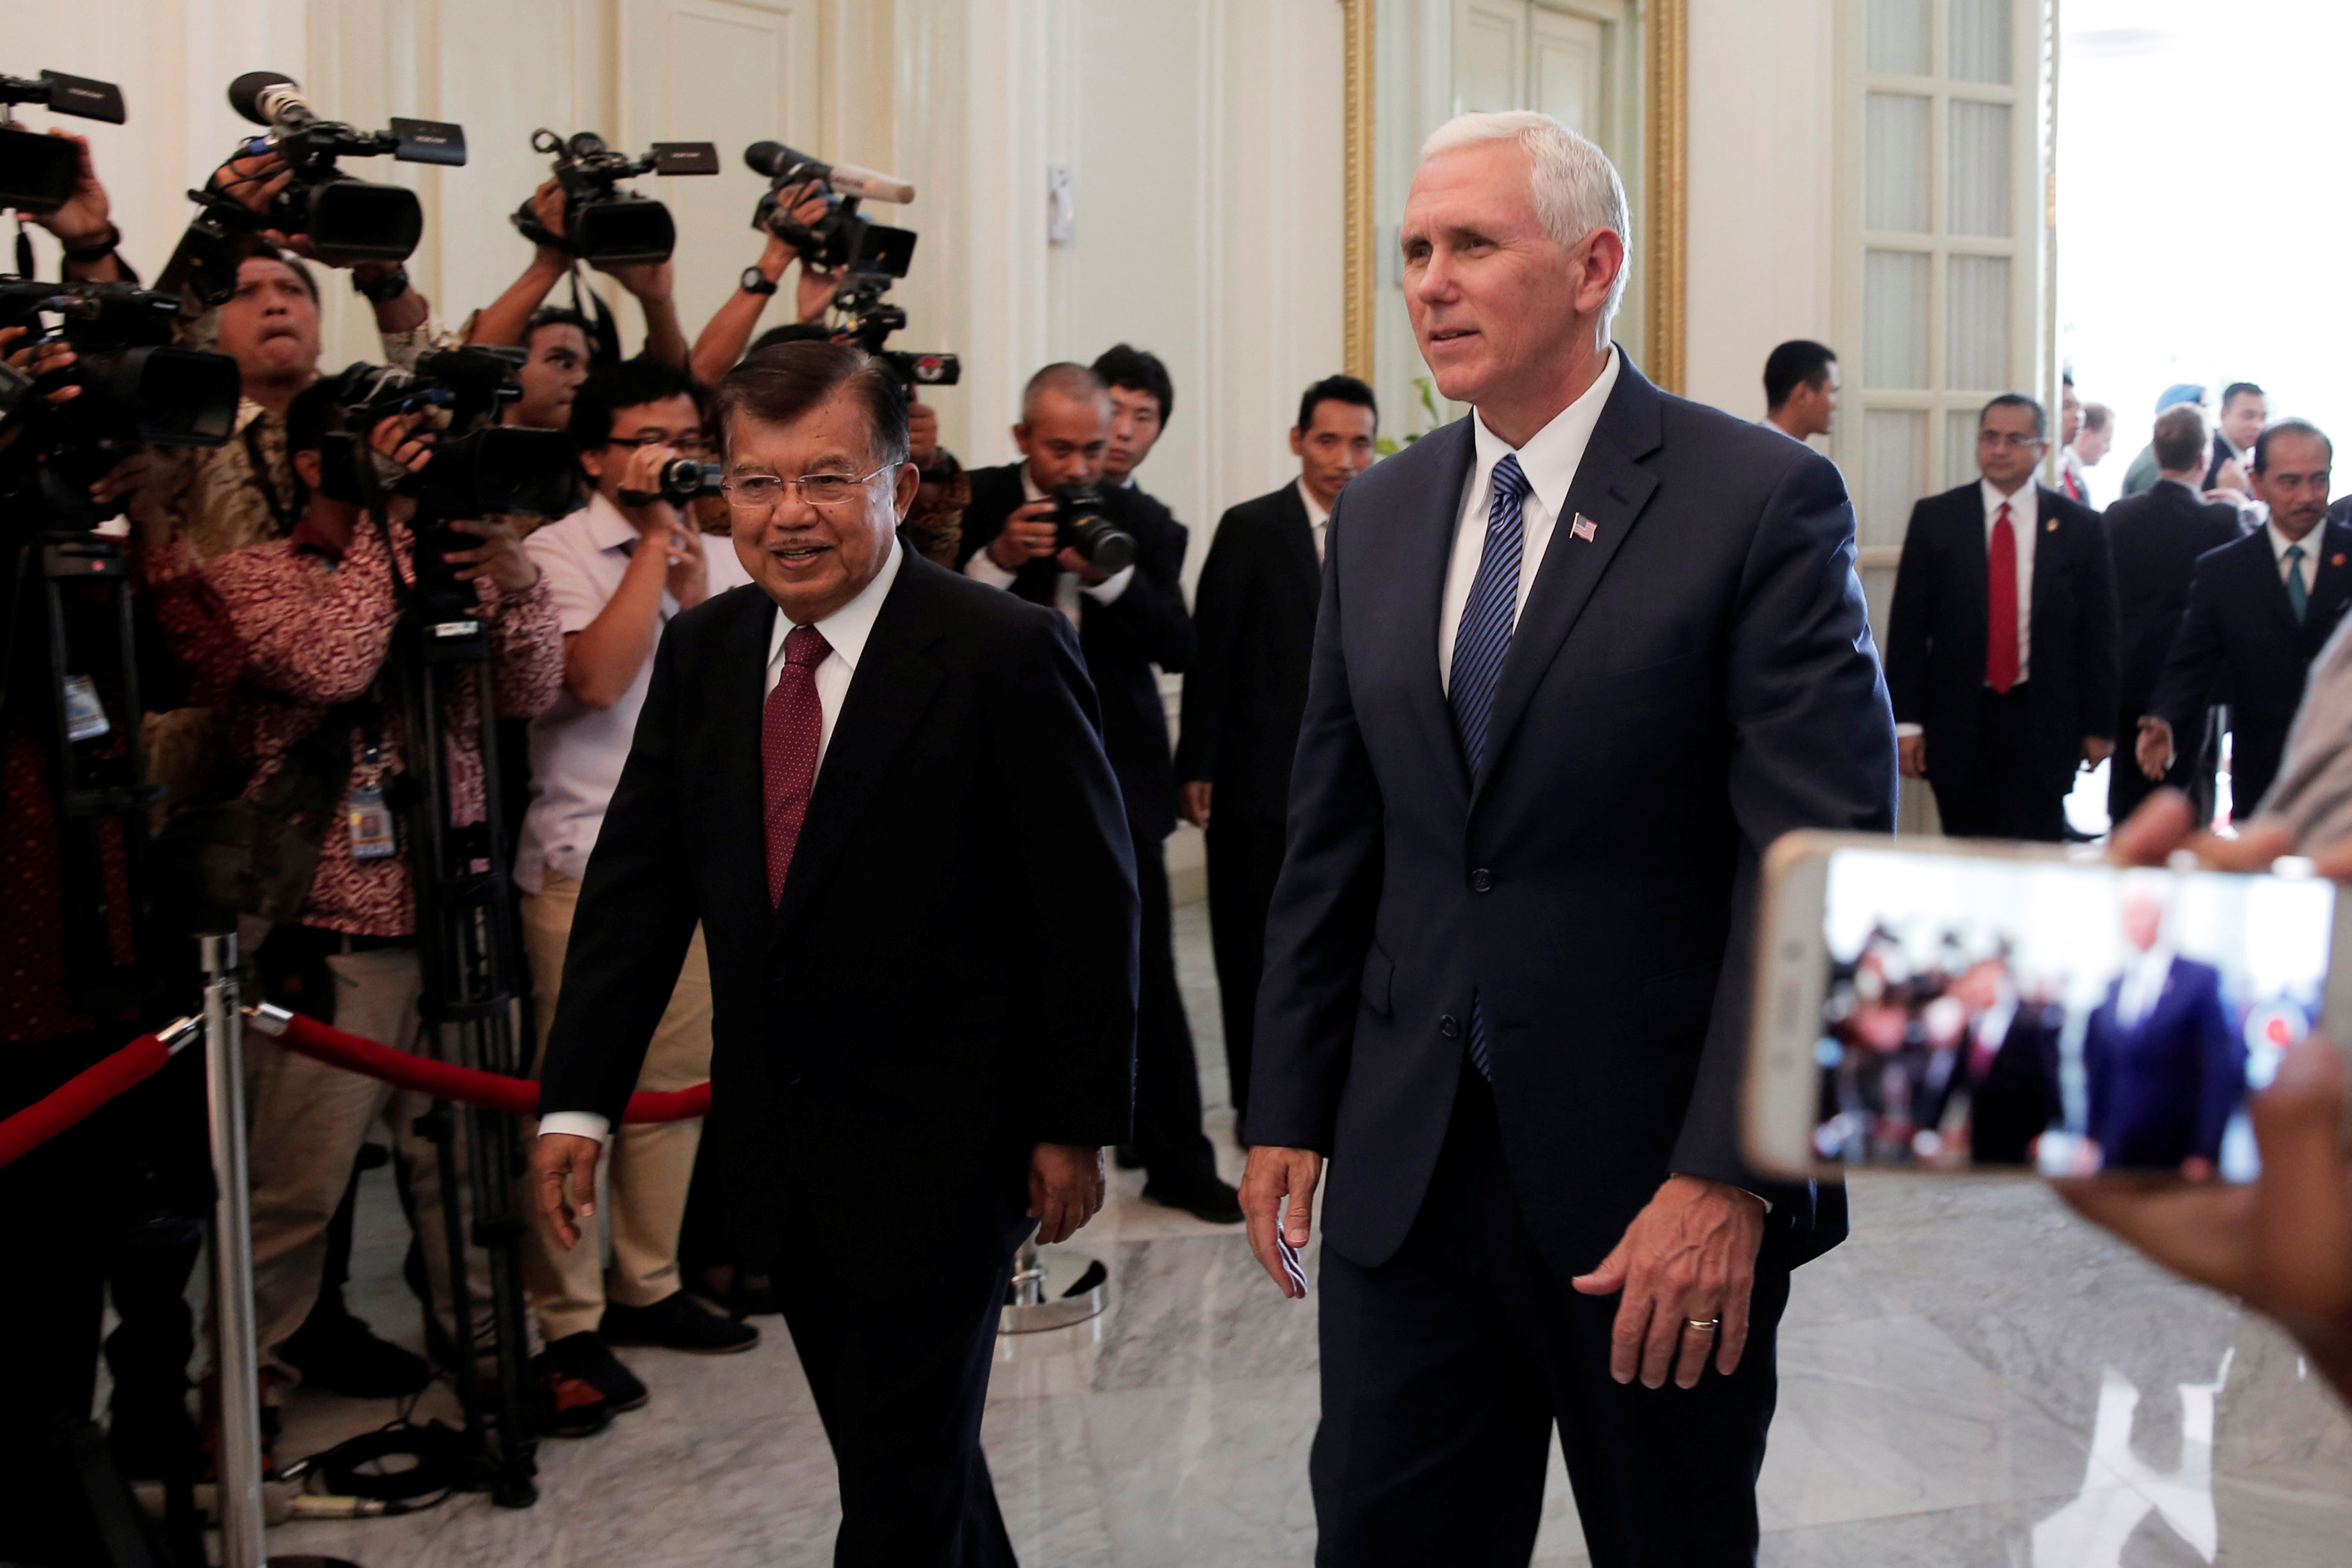 U.S. Vice President Mike Pence (R) walks with Indonesia’s Vice President Jusuf Kalla at the Vice President office in Jakarta, Indonesia April 20, 2017. REUTERS/Beawiharta